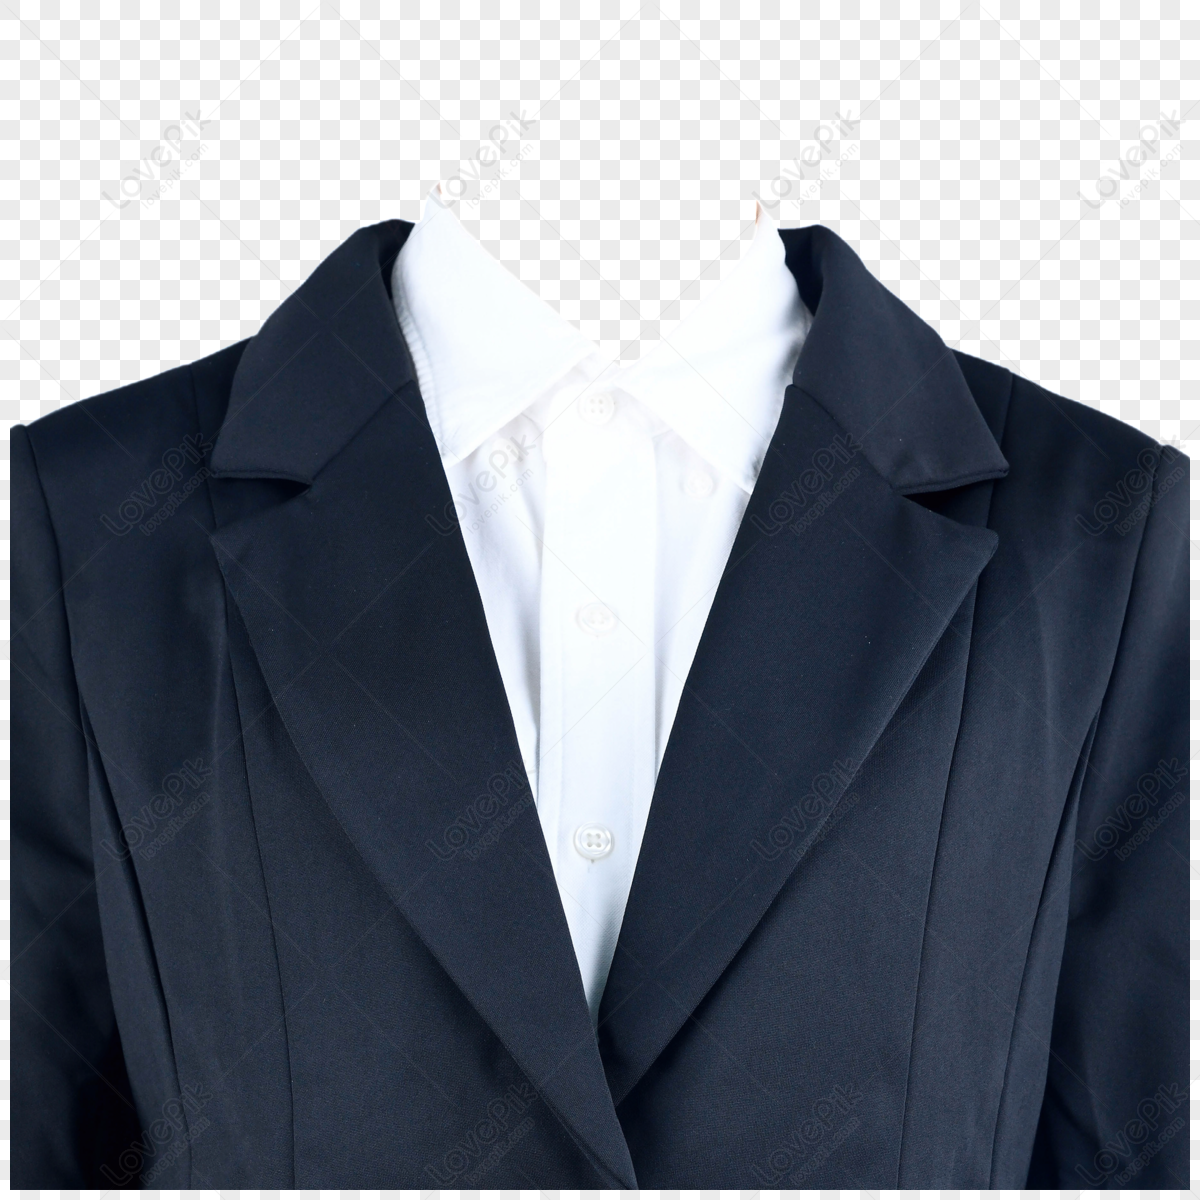 Womens Suit White Shirt Dress,id Photo,women In Suits,business PNG ...